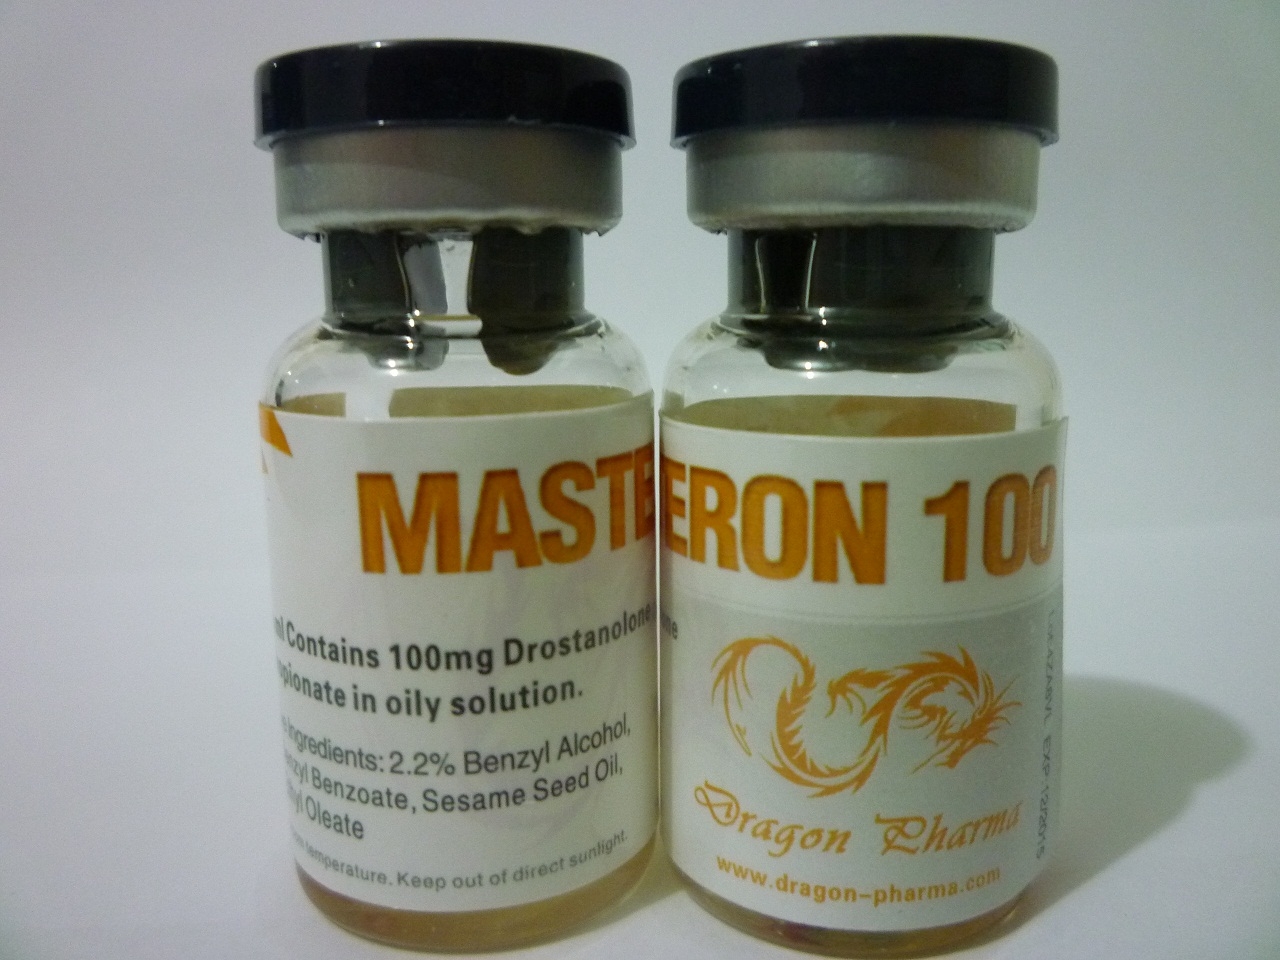 legal steroids for sale